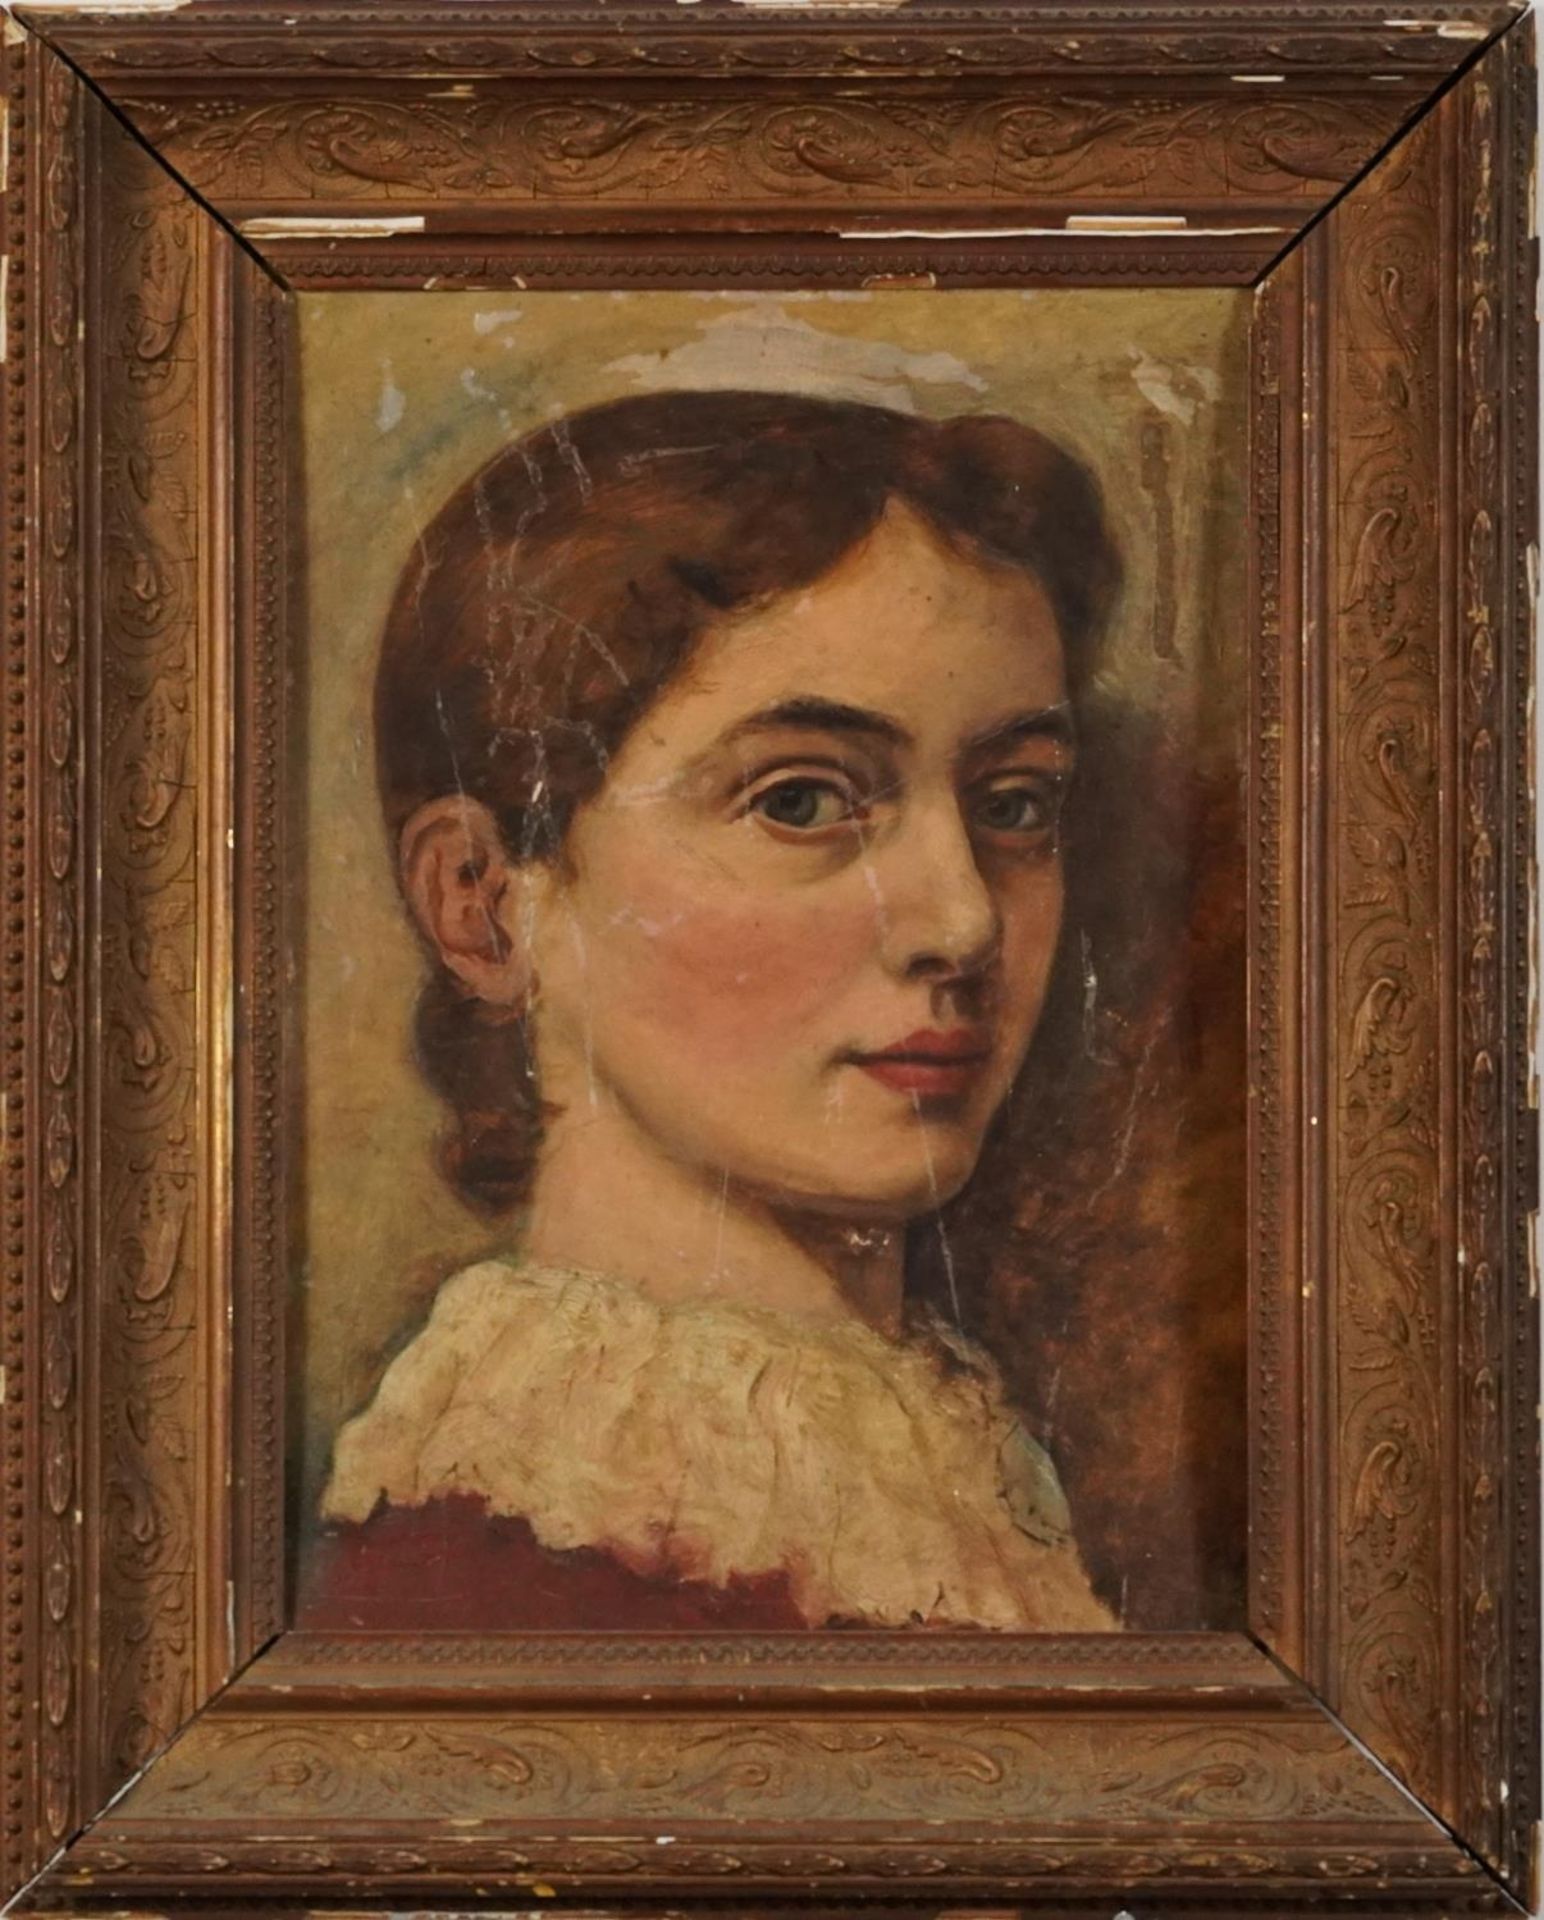 Manner of Frantisek Zdenek Eberl - Head and shoulders portrait of a young female, Impressionist - Image 2 of 3